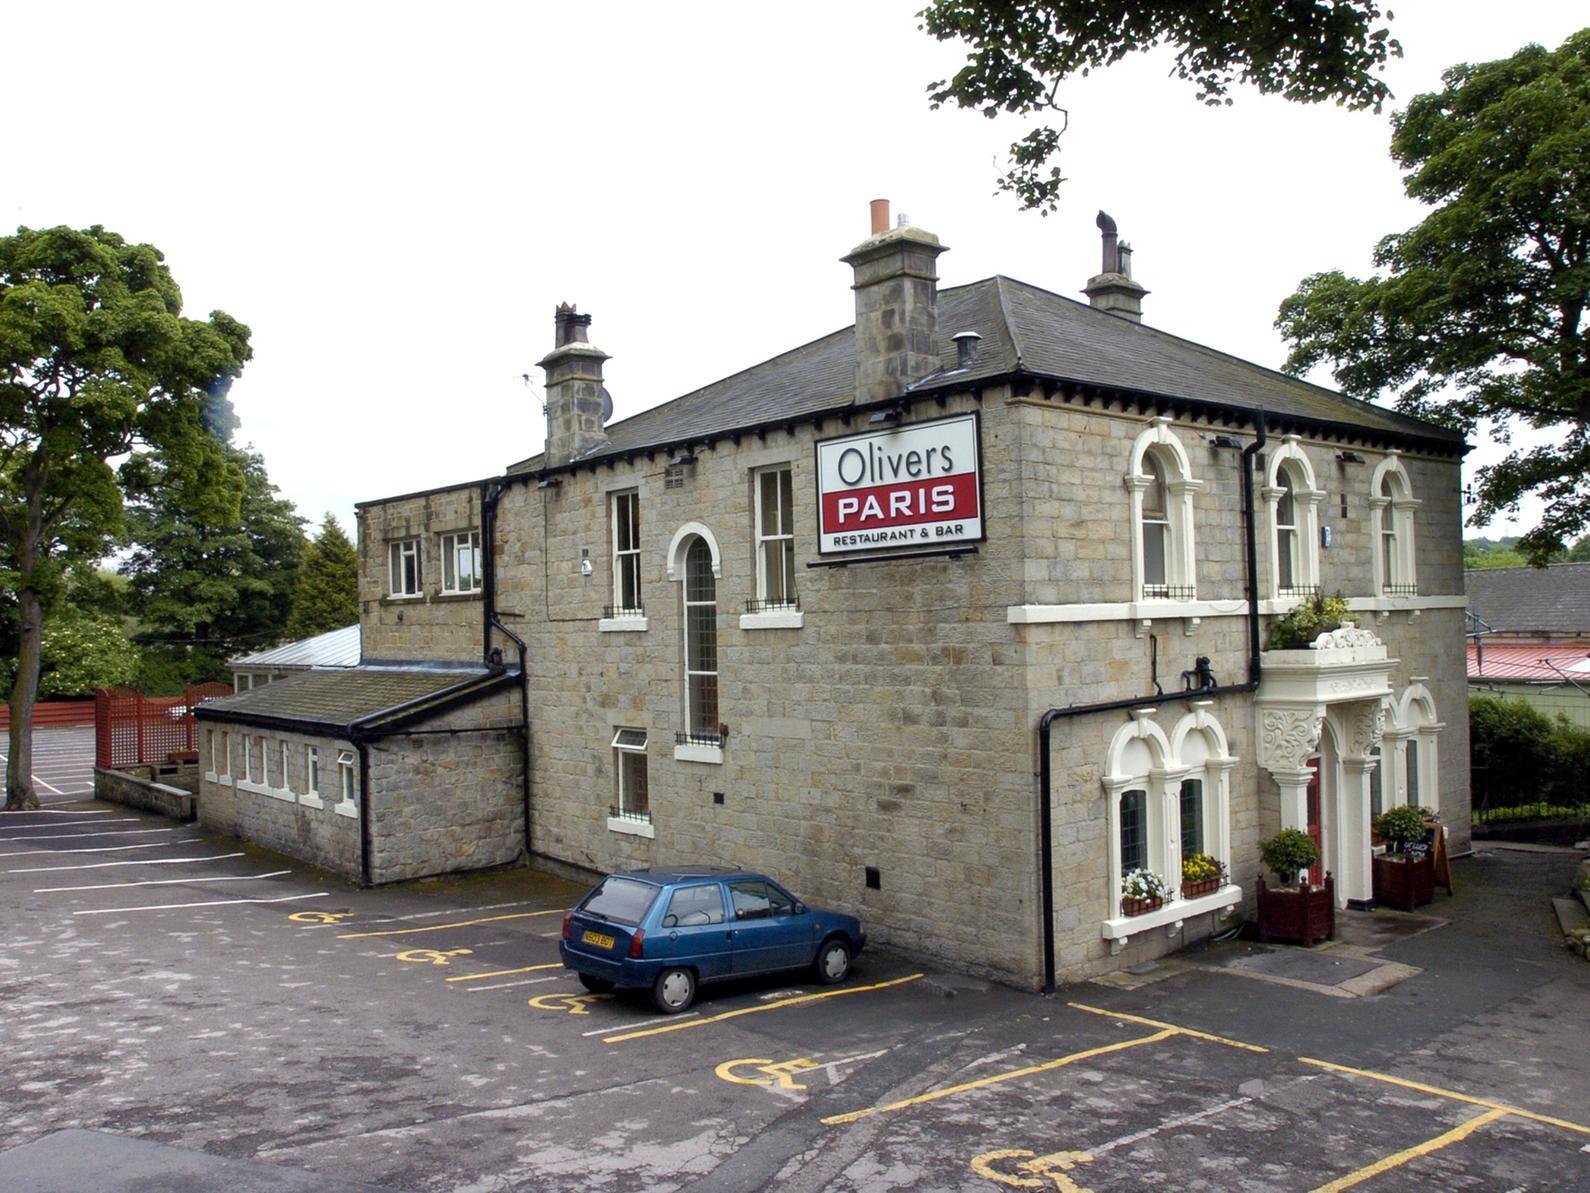 Did you enjoy a meal at Oliver Paris restaurant in Rodley back in the day?